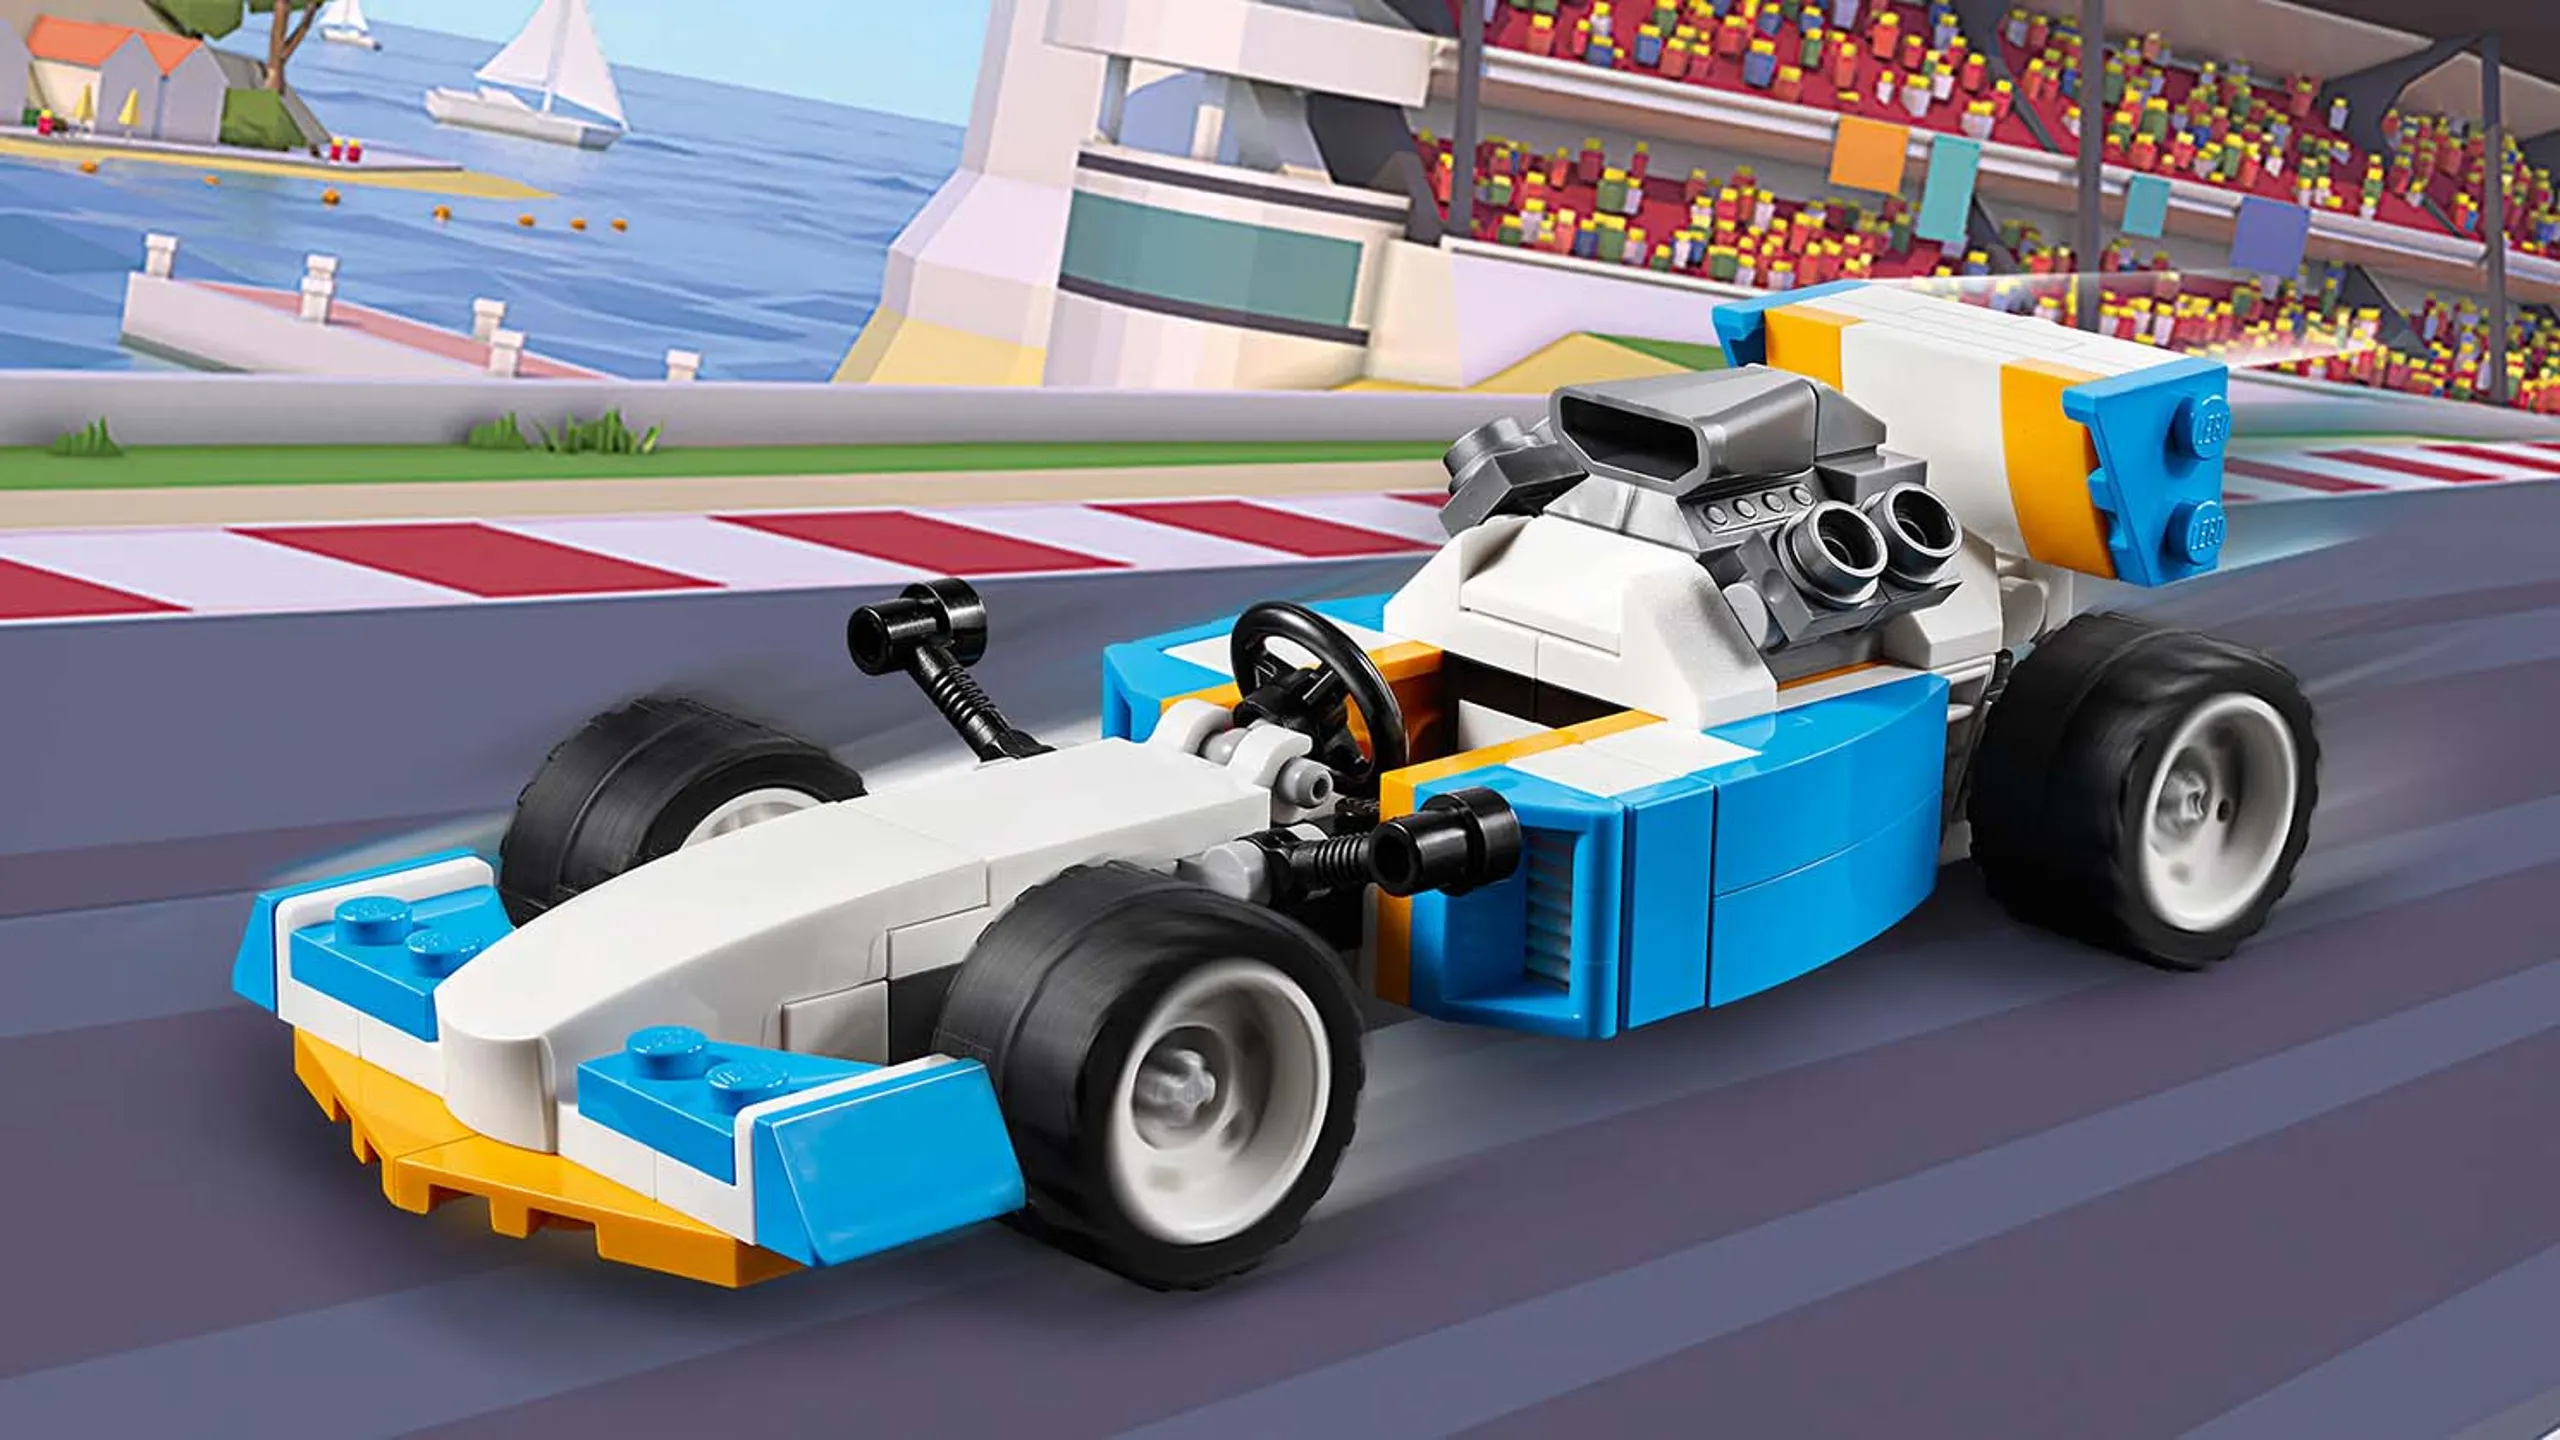 LEGO Creator 3 in 1 - 31072 Extreme Engines - A Race Car with a large rear engine is portrayed on a race track.